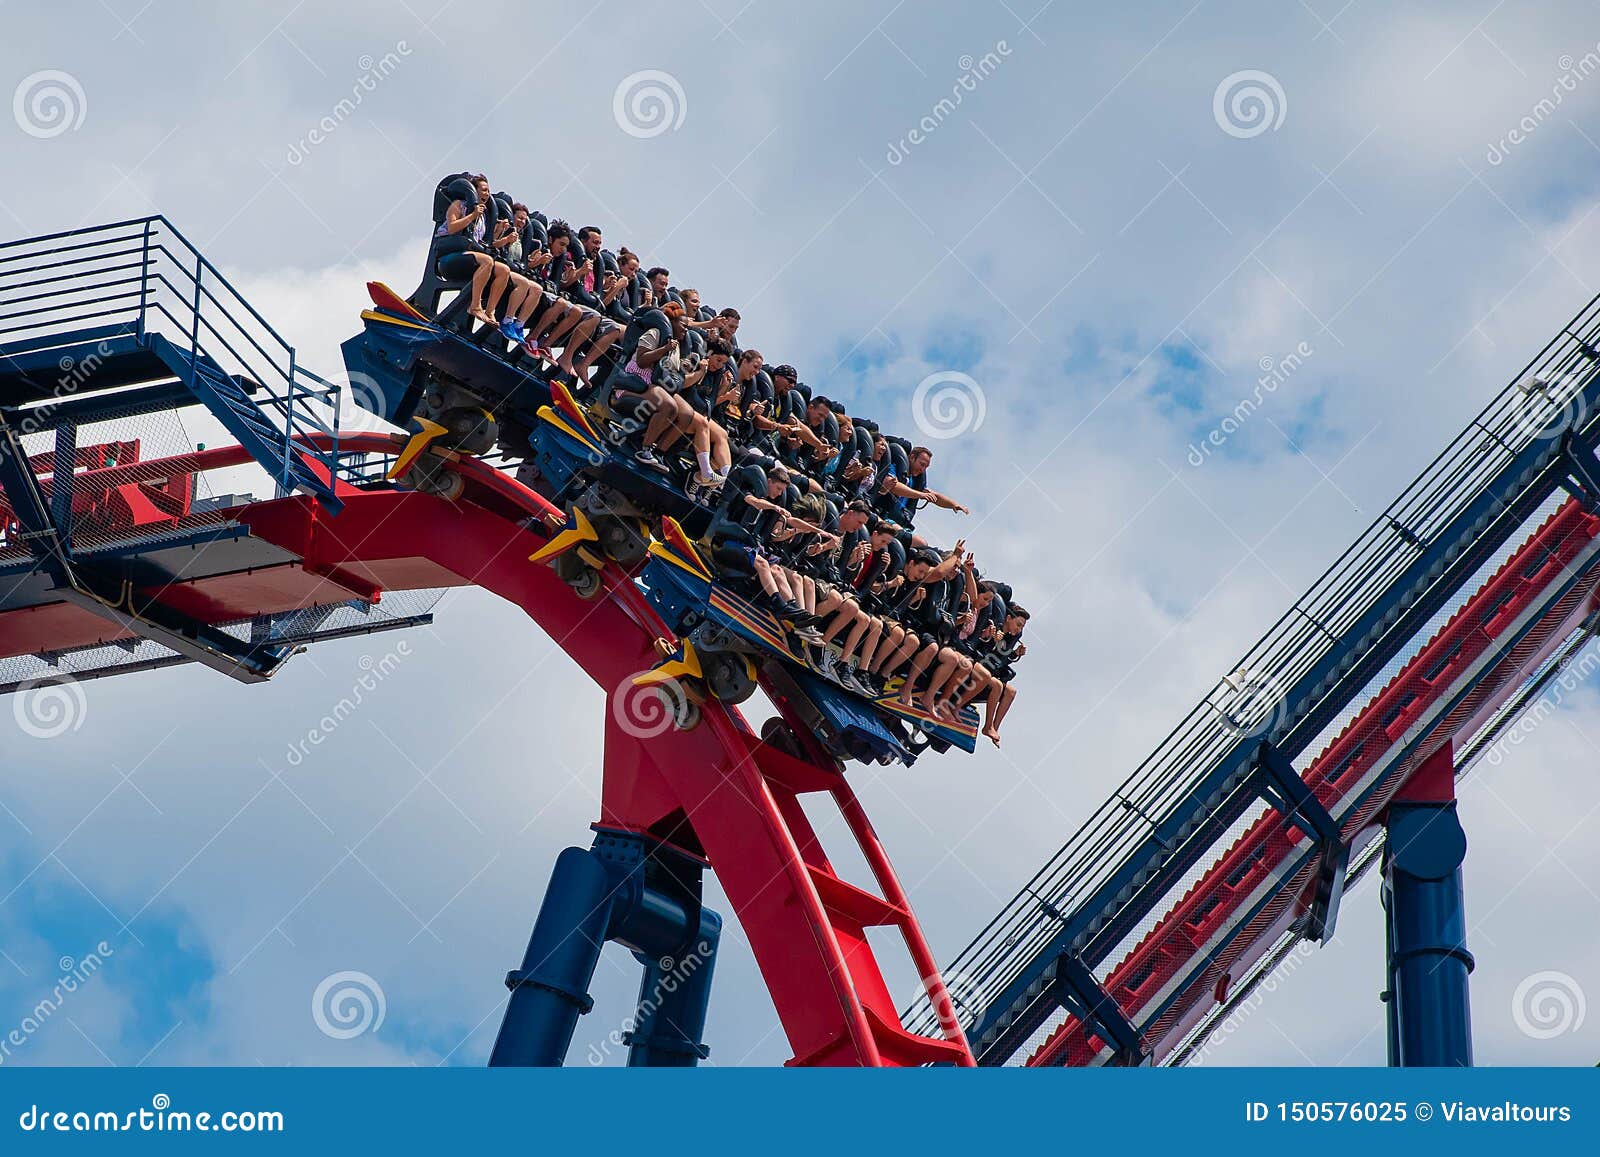 Excited Faces Of People Enyoing A Sheikra Rollercoaster Ride At